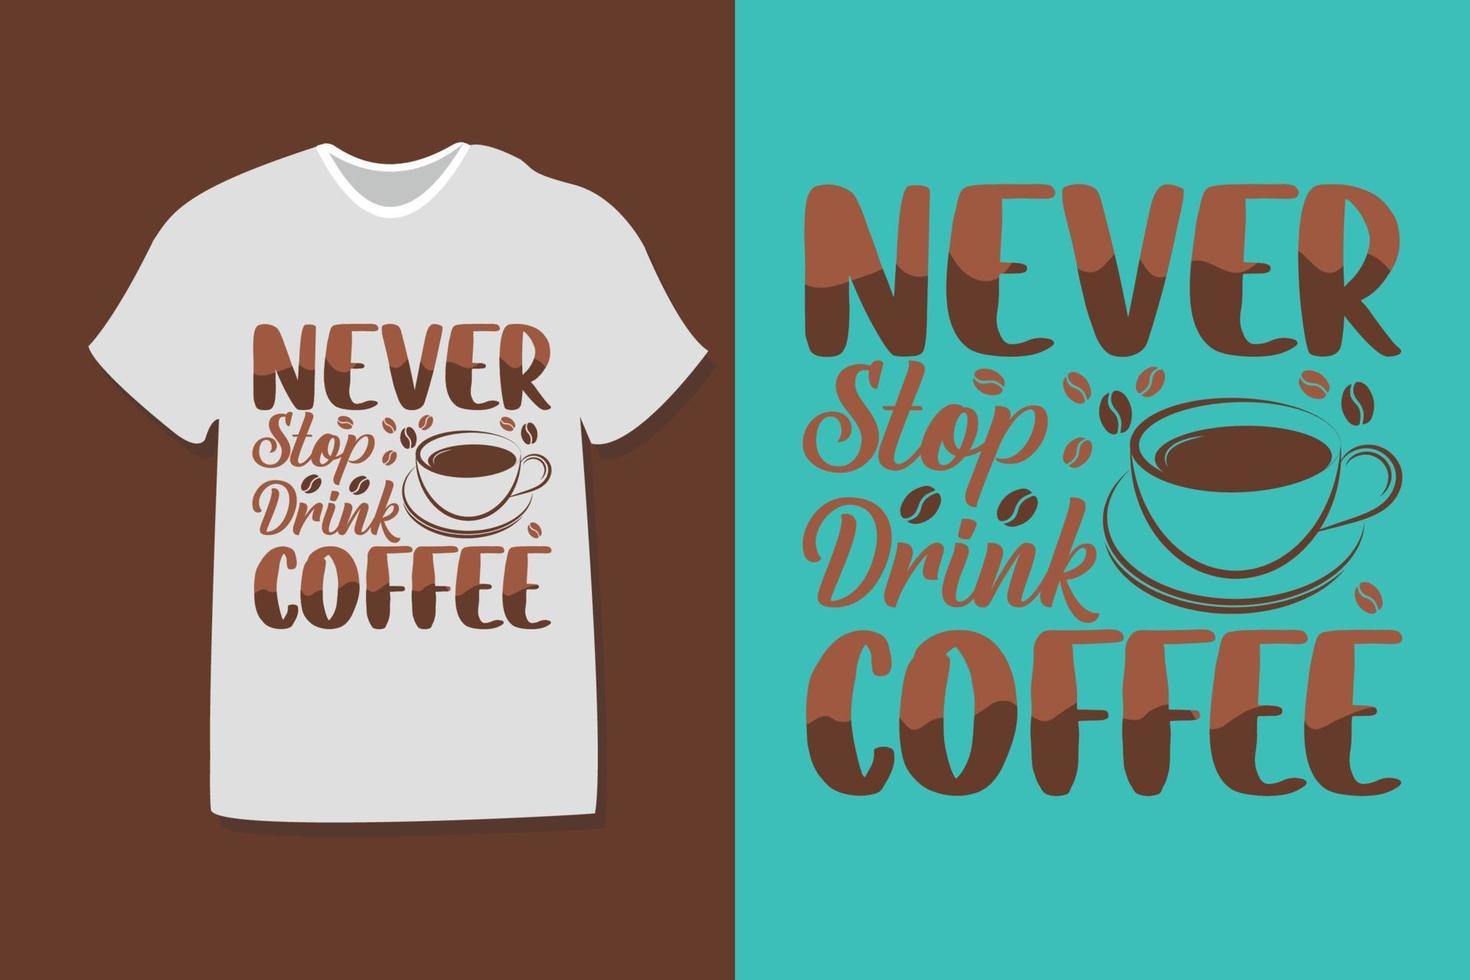 Never stop drink coffee coffee typography design for t-shirts, print, templates, logos, mug vector